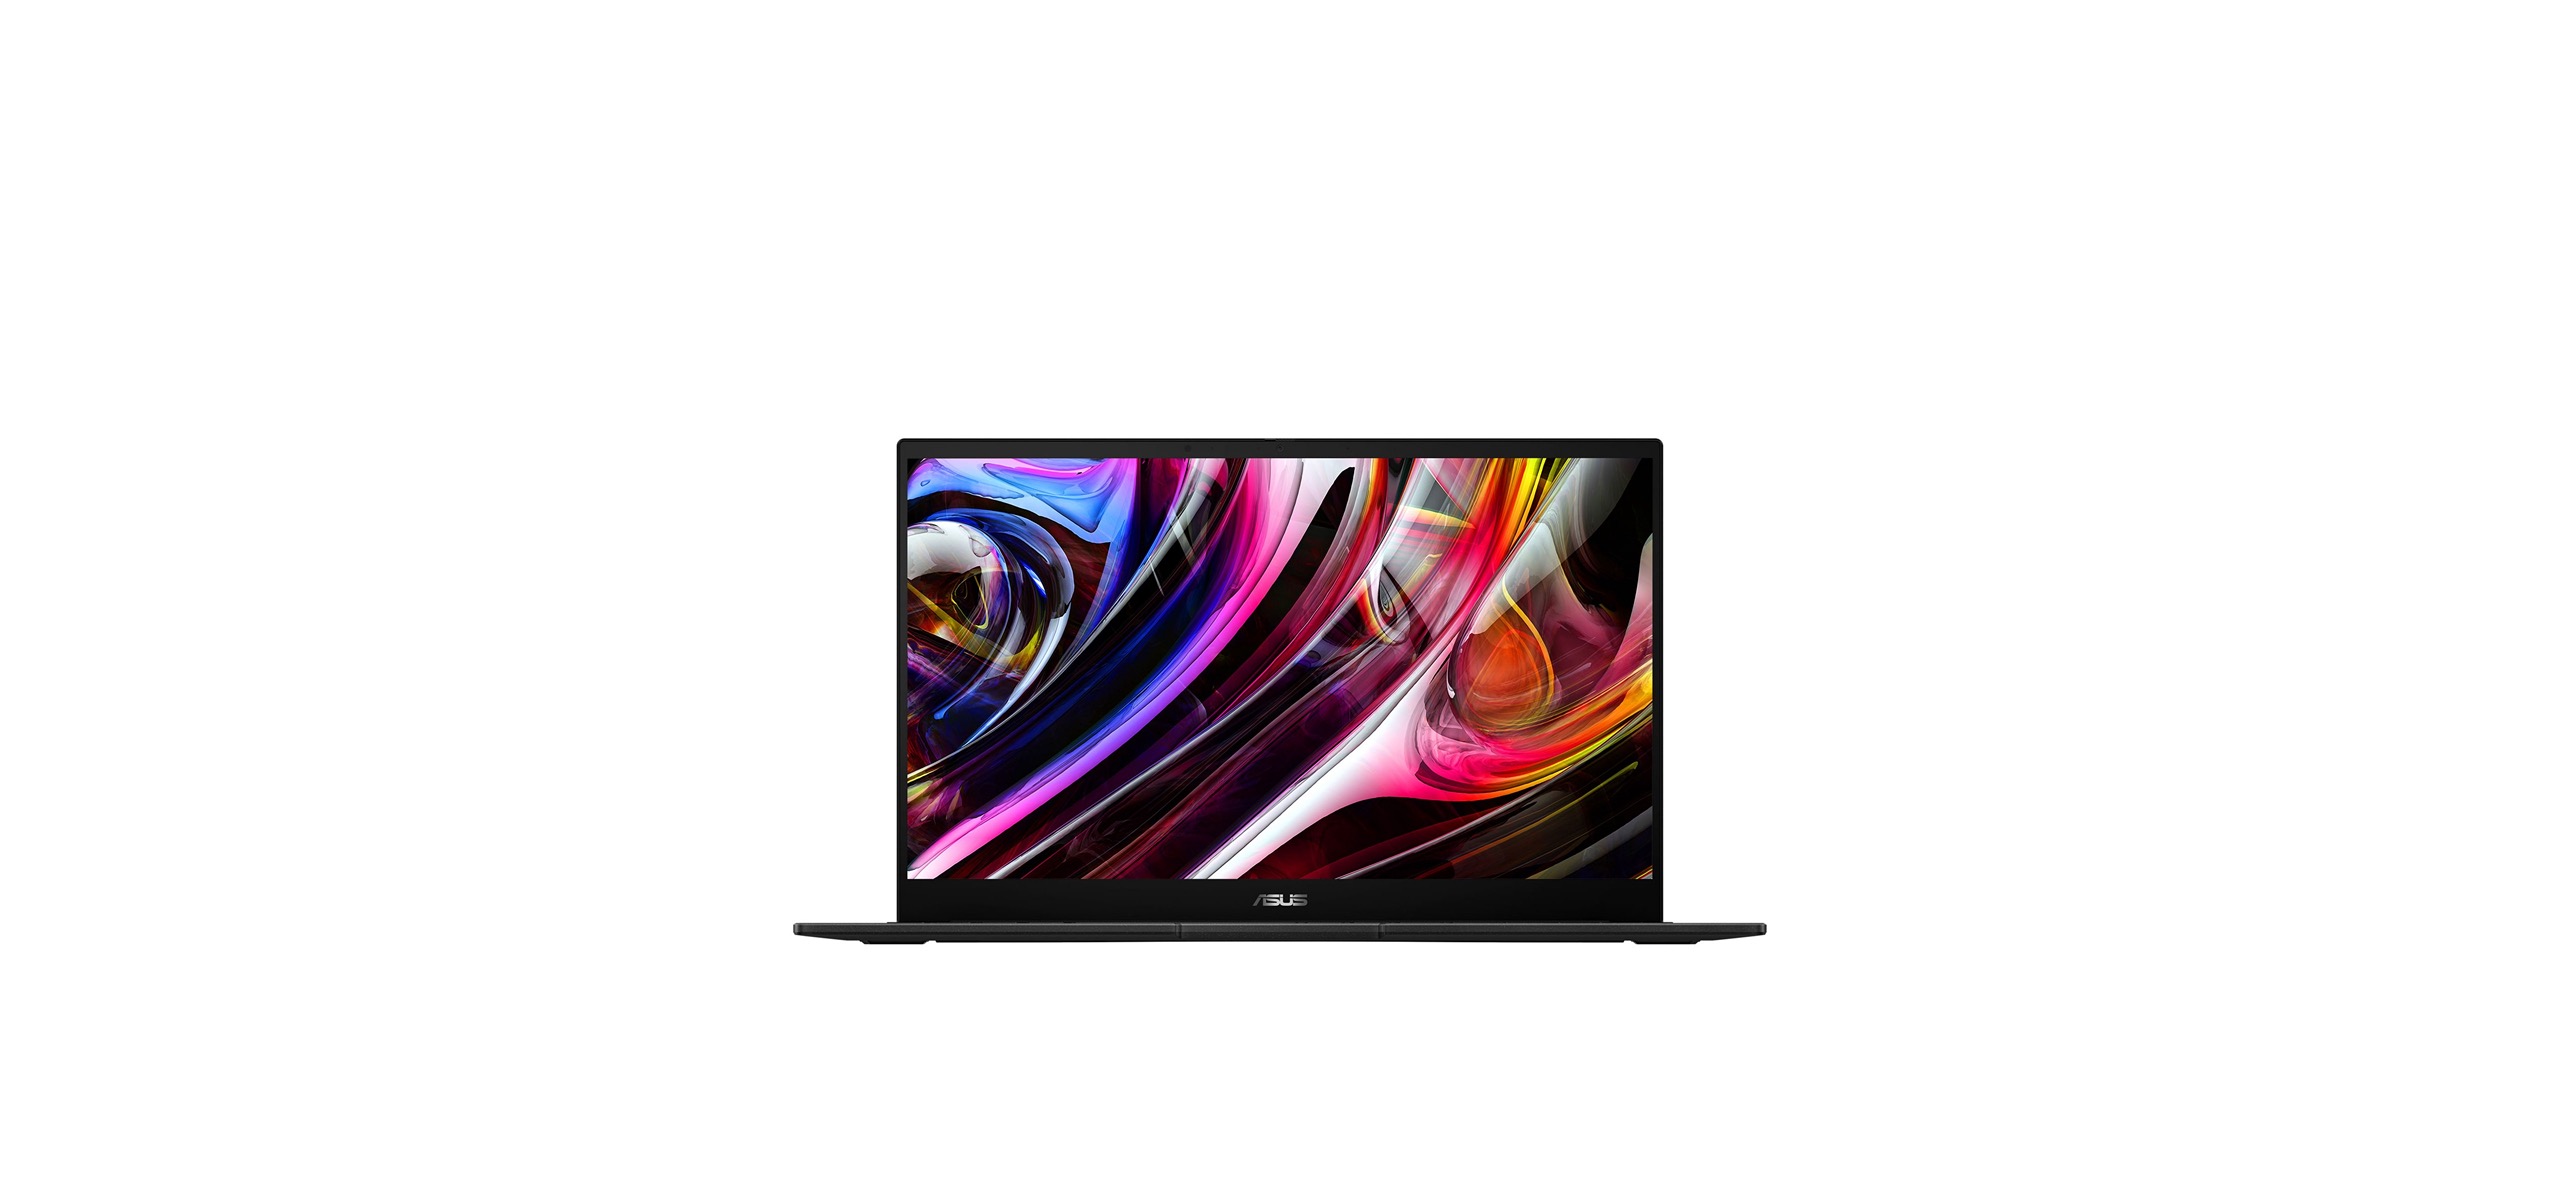 https://dlcdnwebimgs.asus.com/files/media/4e9bbeea-d05b-4bd1-8930-79d6015f1016/v1/features/sections/display/images/outer/large/1x/s1/main.jpg